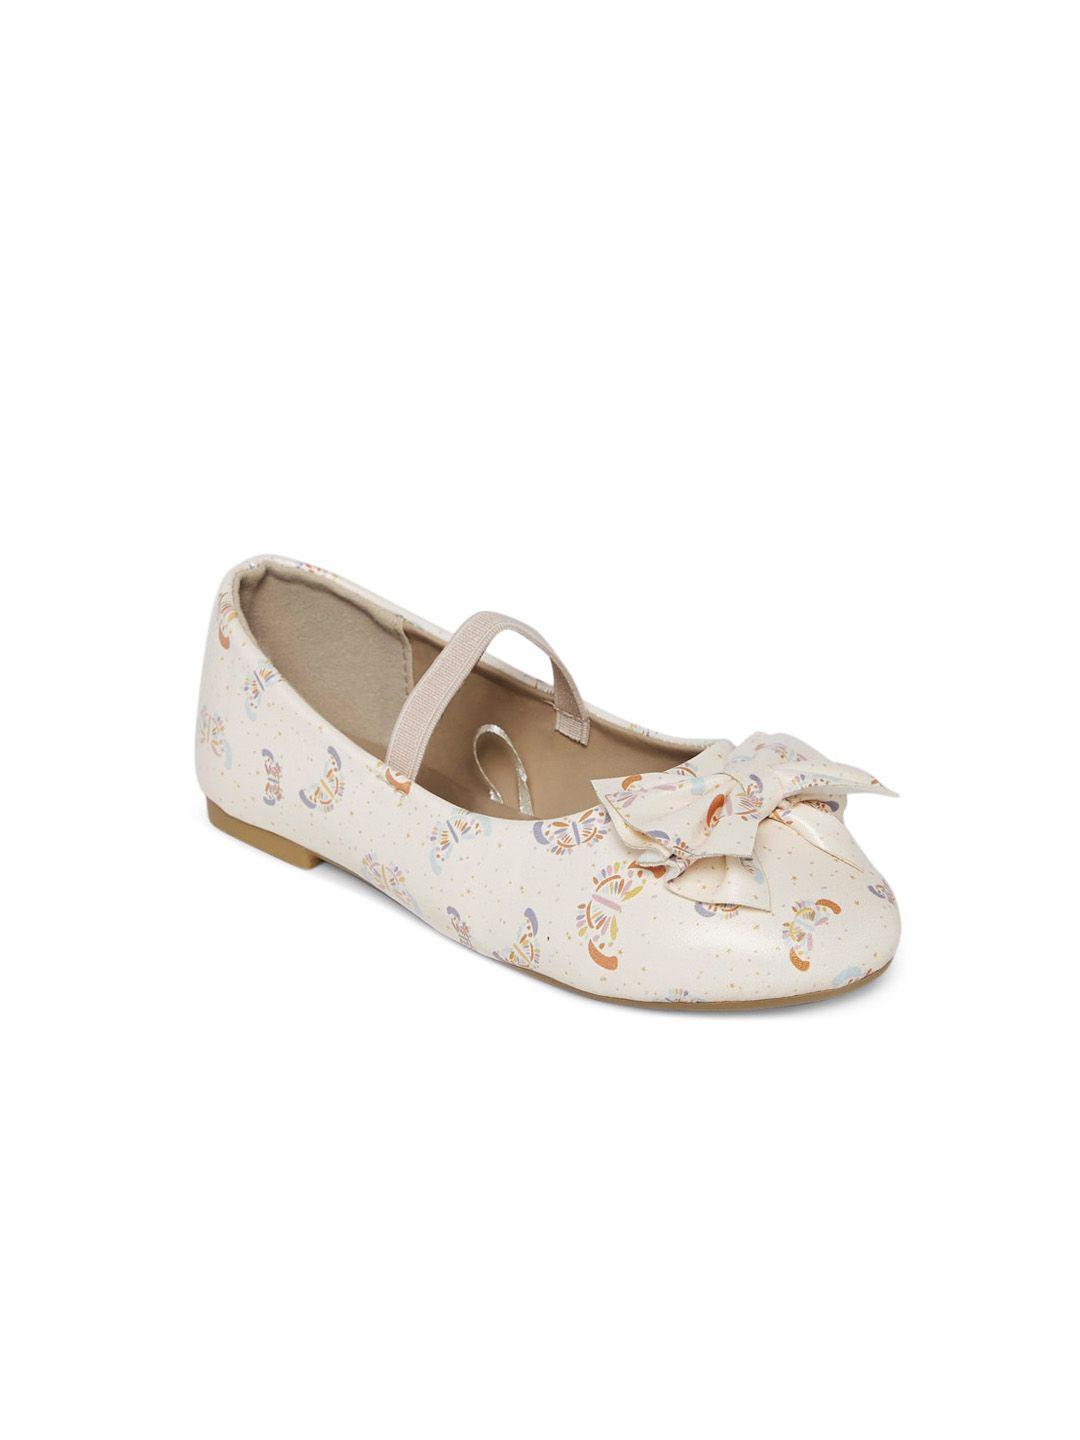 pantaloons junior girls off white ballerinas with laser cuts flats